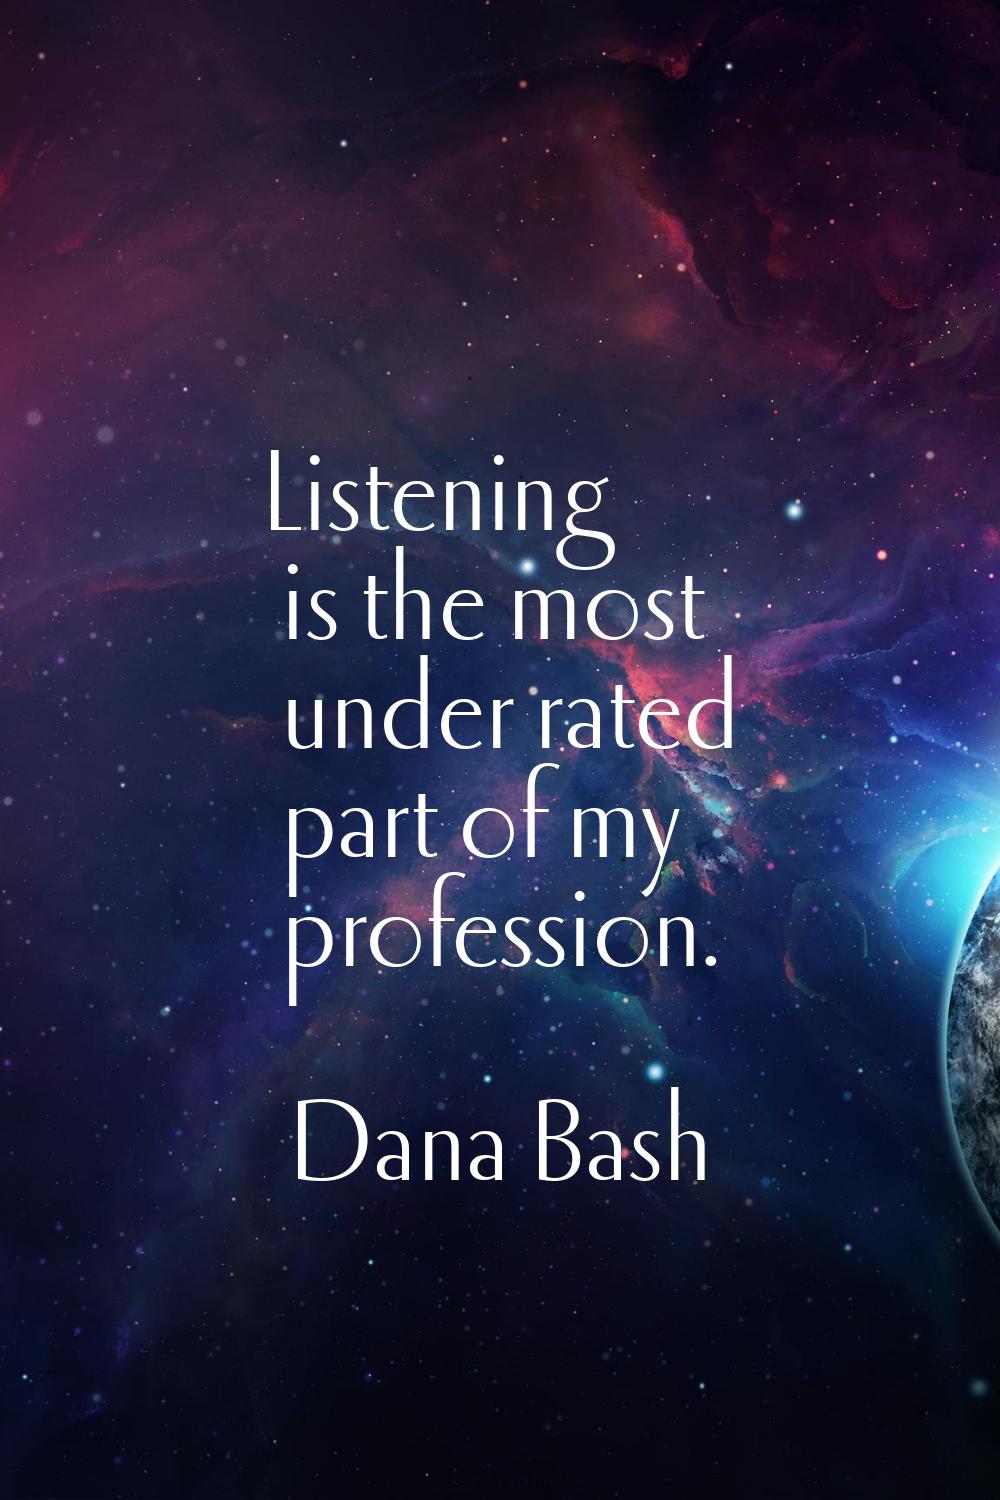 Listening is the most under rated part of my profession.